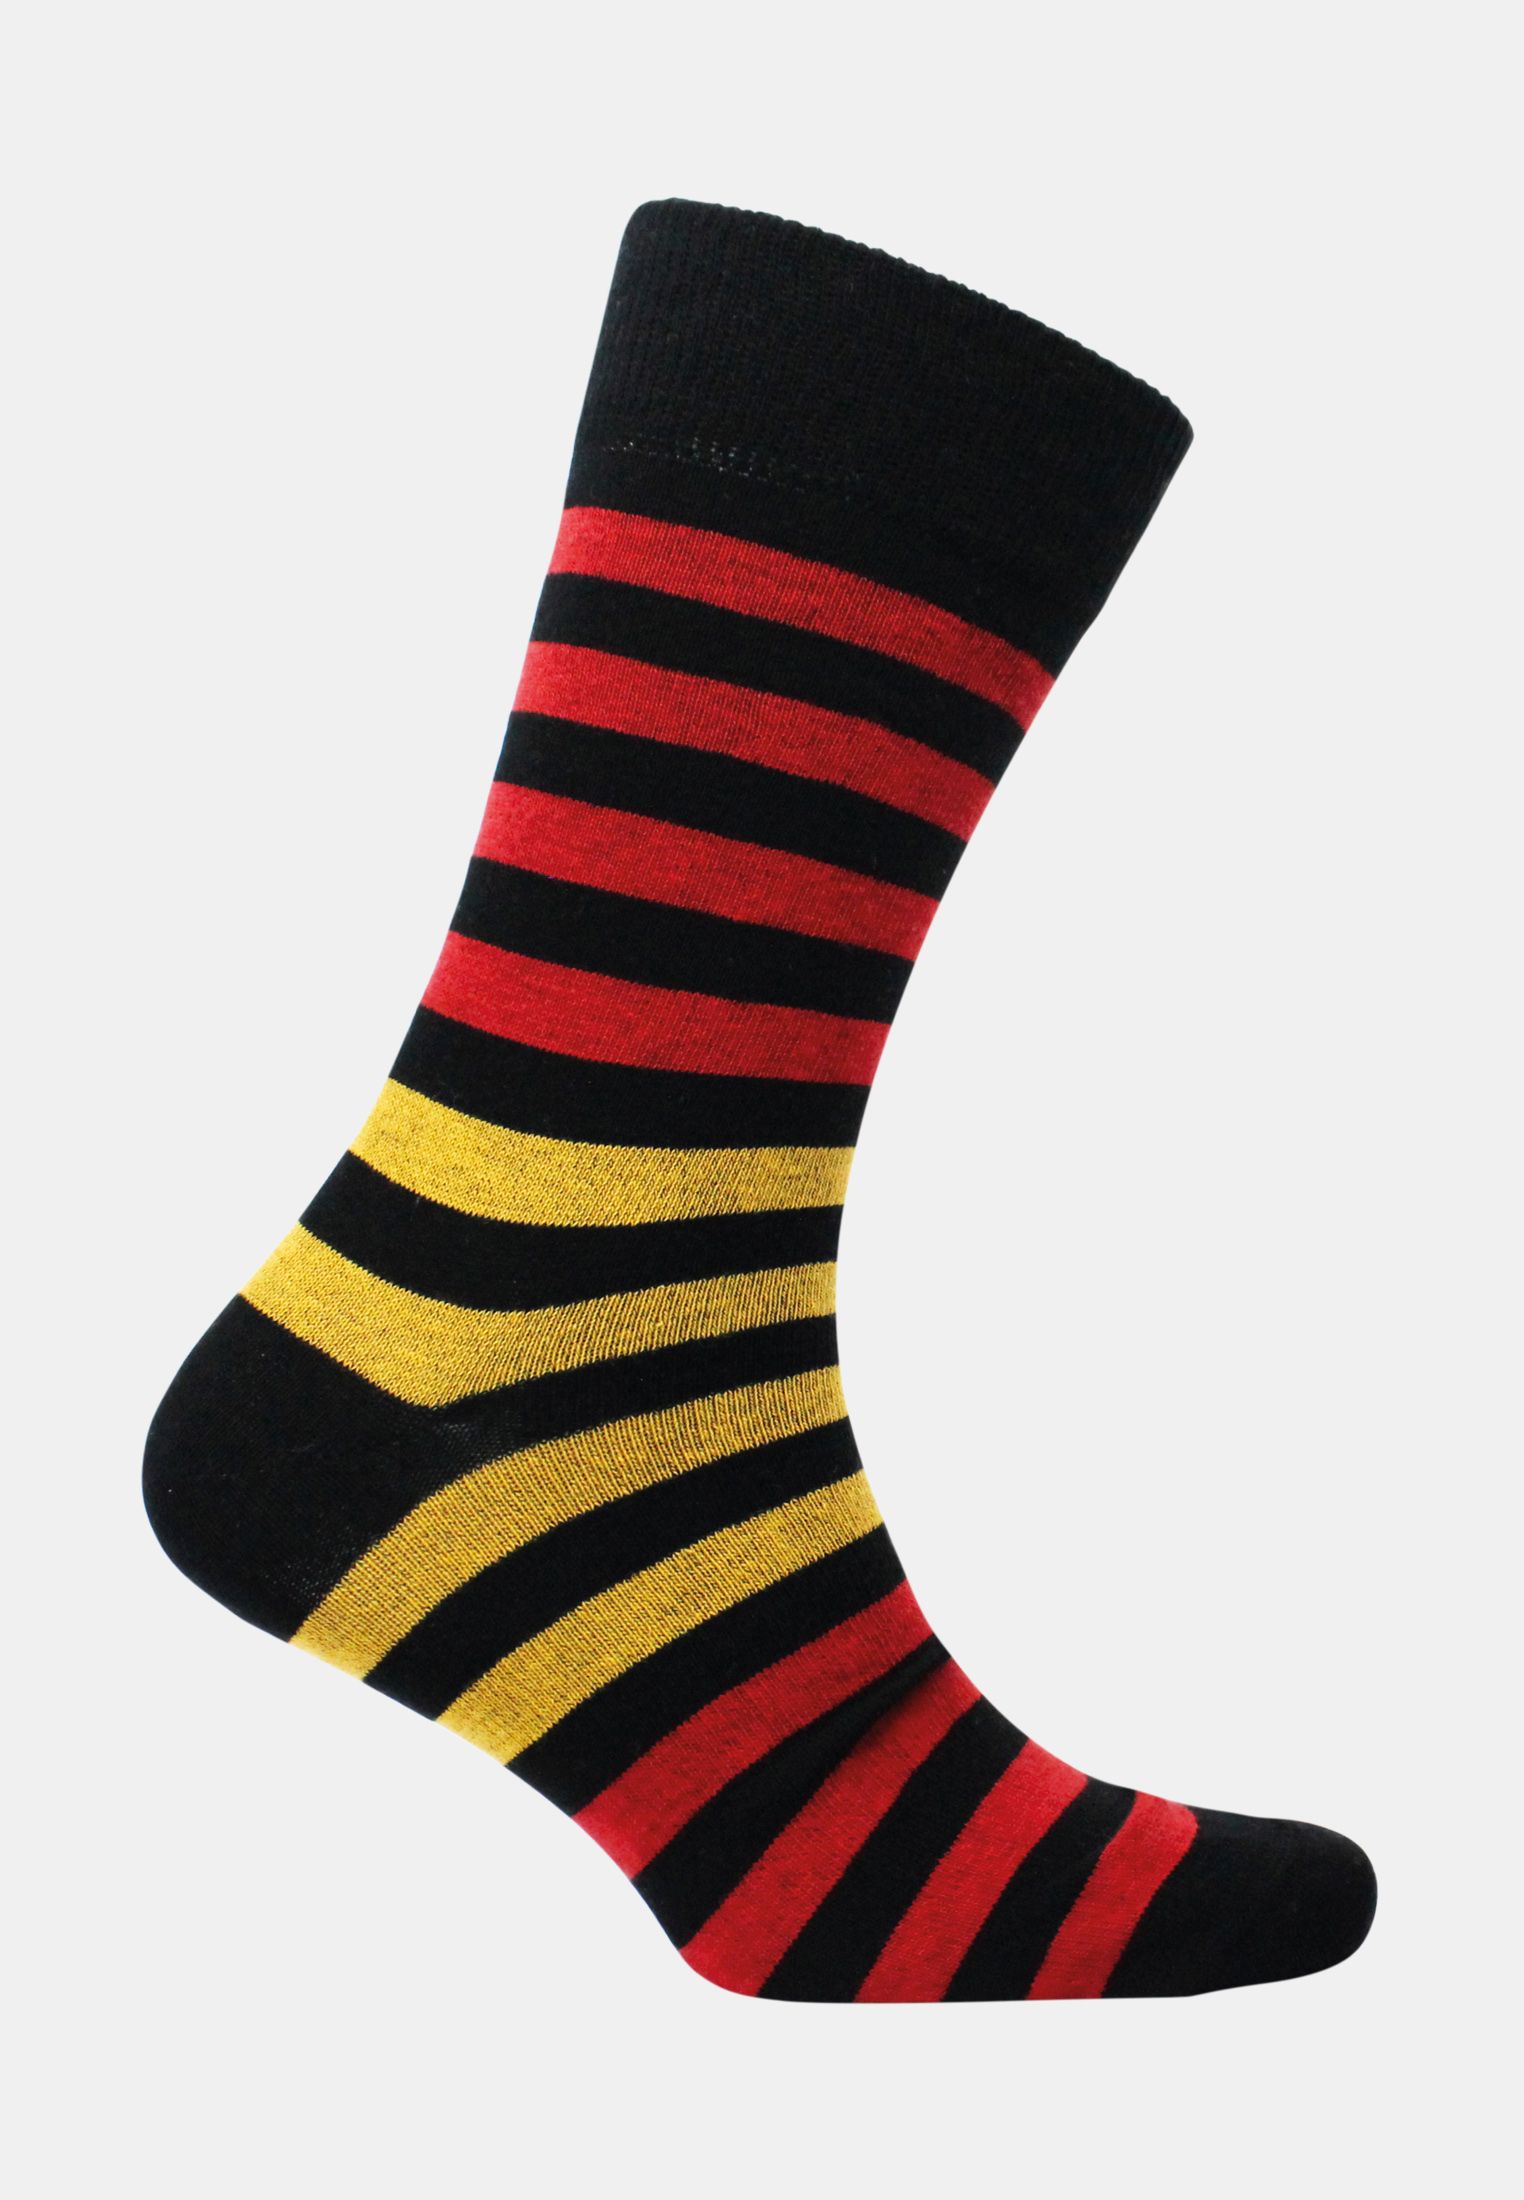 Barnstaple Black with Red and Gold Stripe Socks